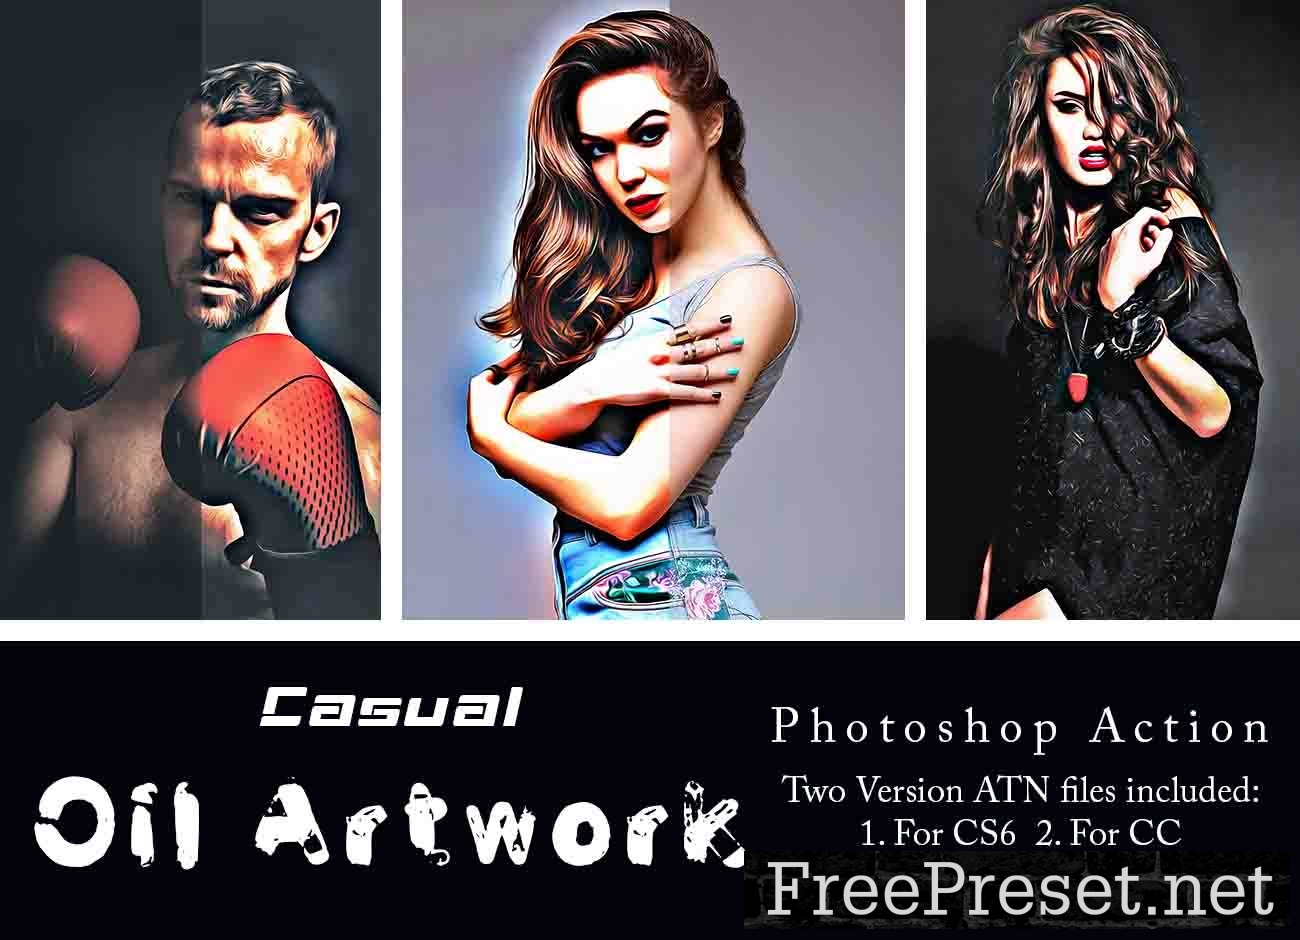 Casual Oil Artwork Photoshop Action 91678107